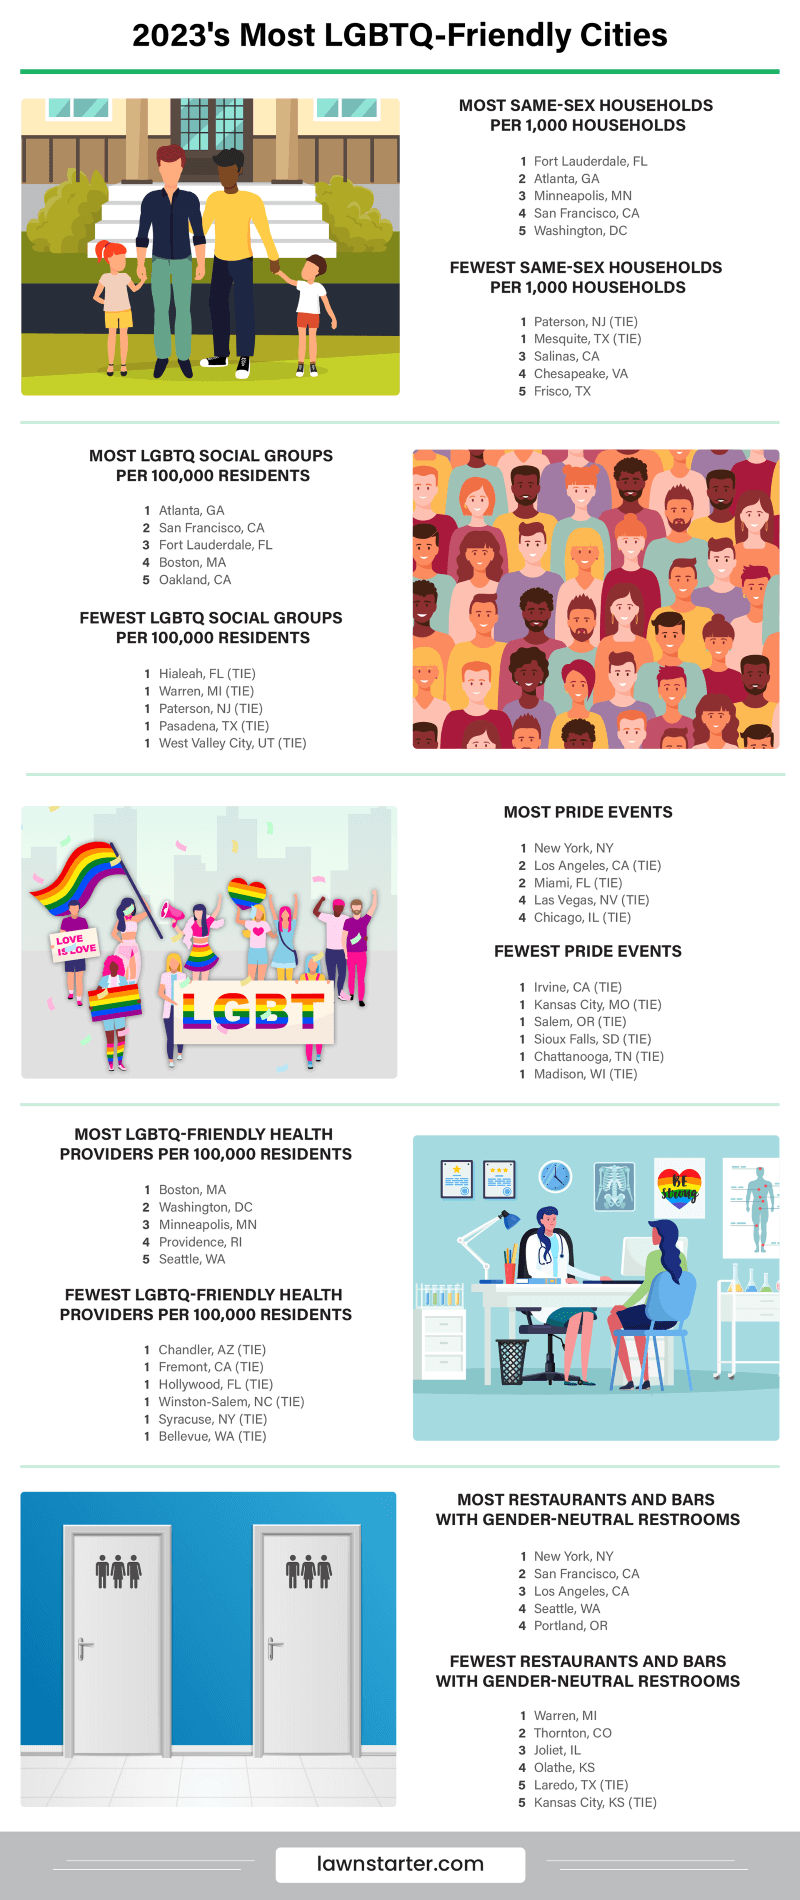 Infographic showing the Most LGBTQ-Friendly Cities, a ranking based on anti-discrimination policies, the share of same-sex households, LGBTQ support resources, and more